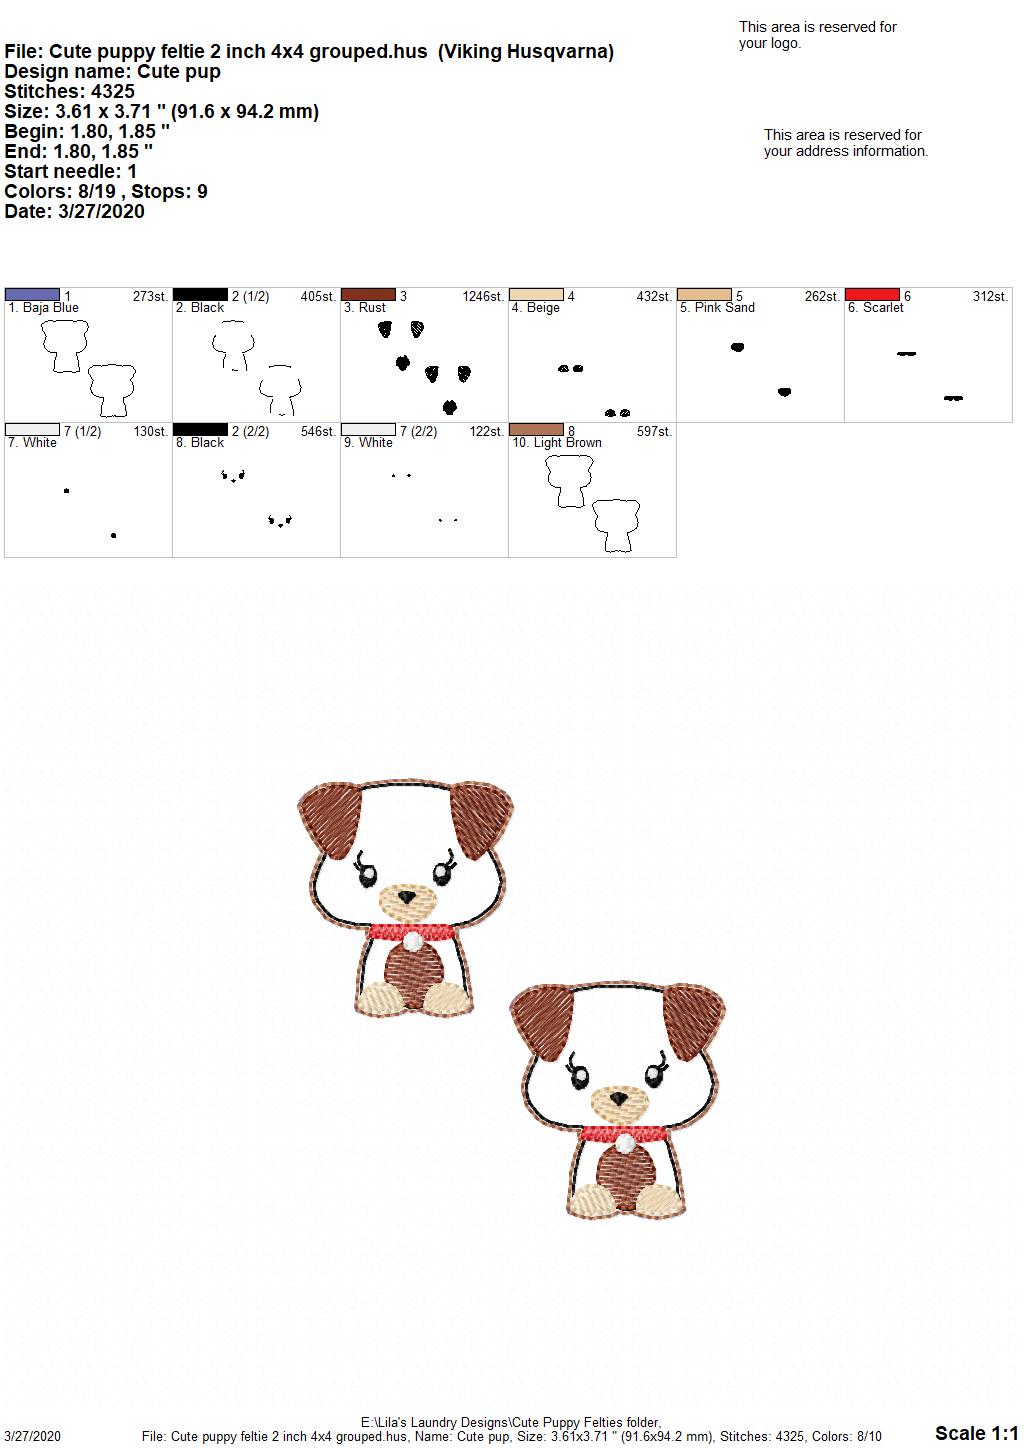 Cute Puppy Felties - 3 sizes - 4x4 and 5x7 Grouped- Digital Embroidery Design